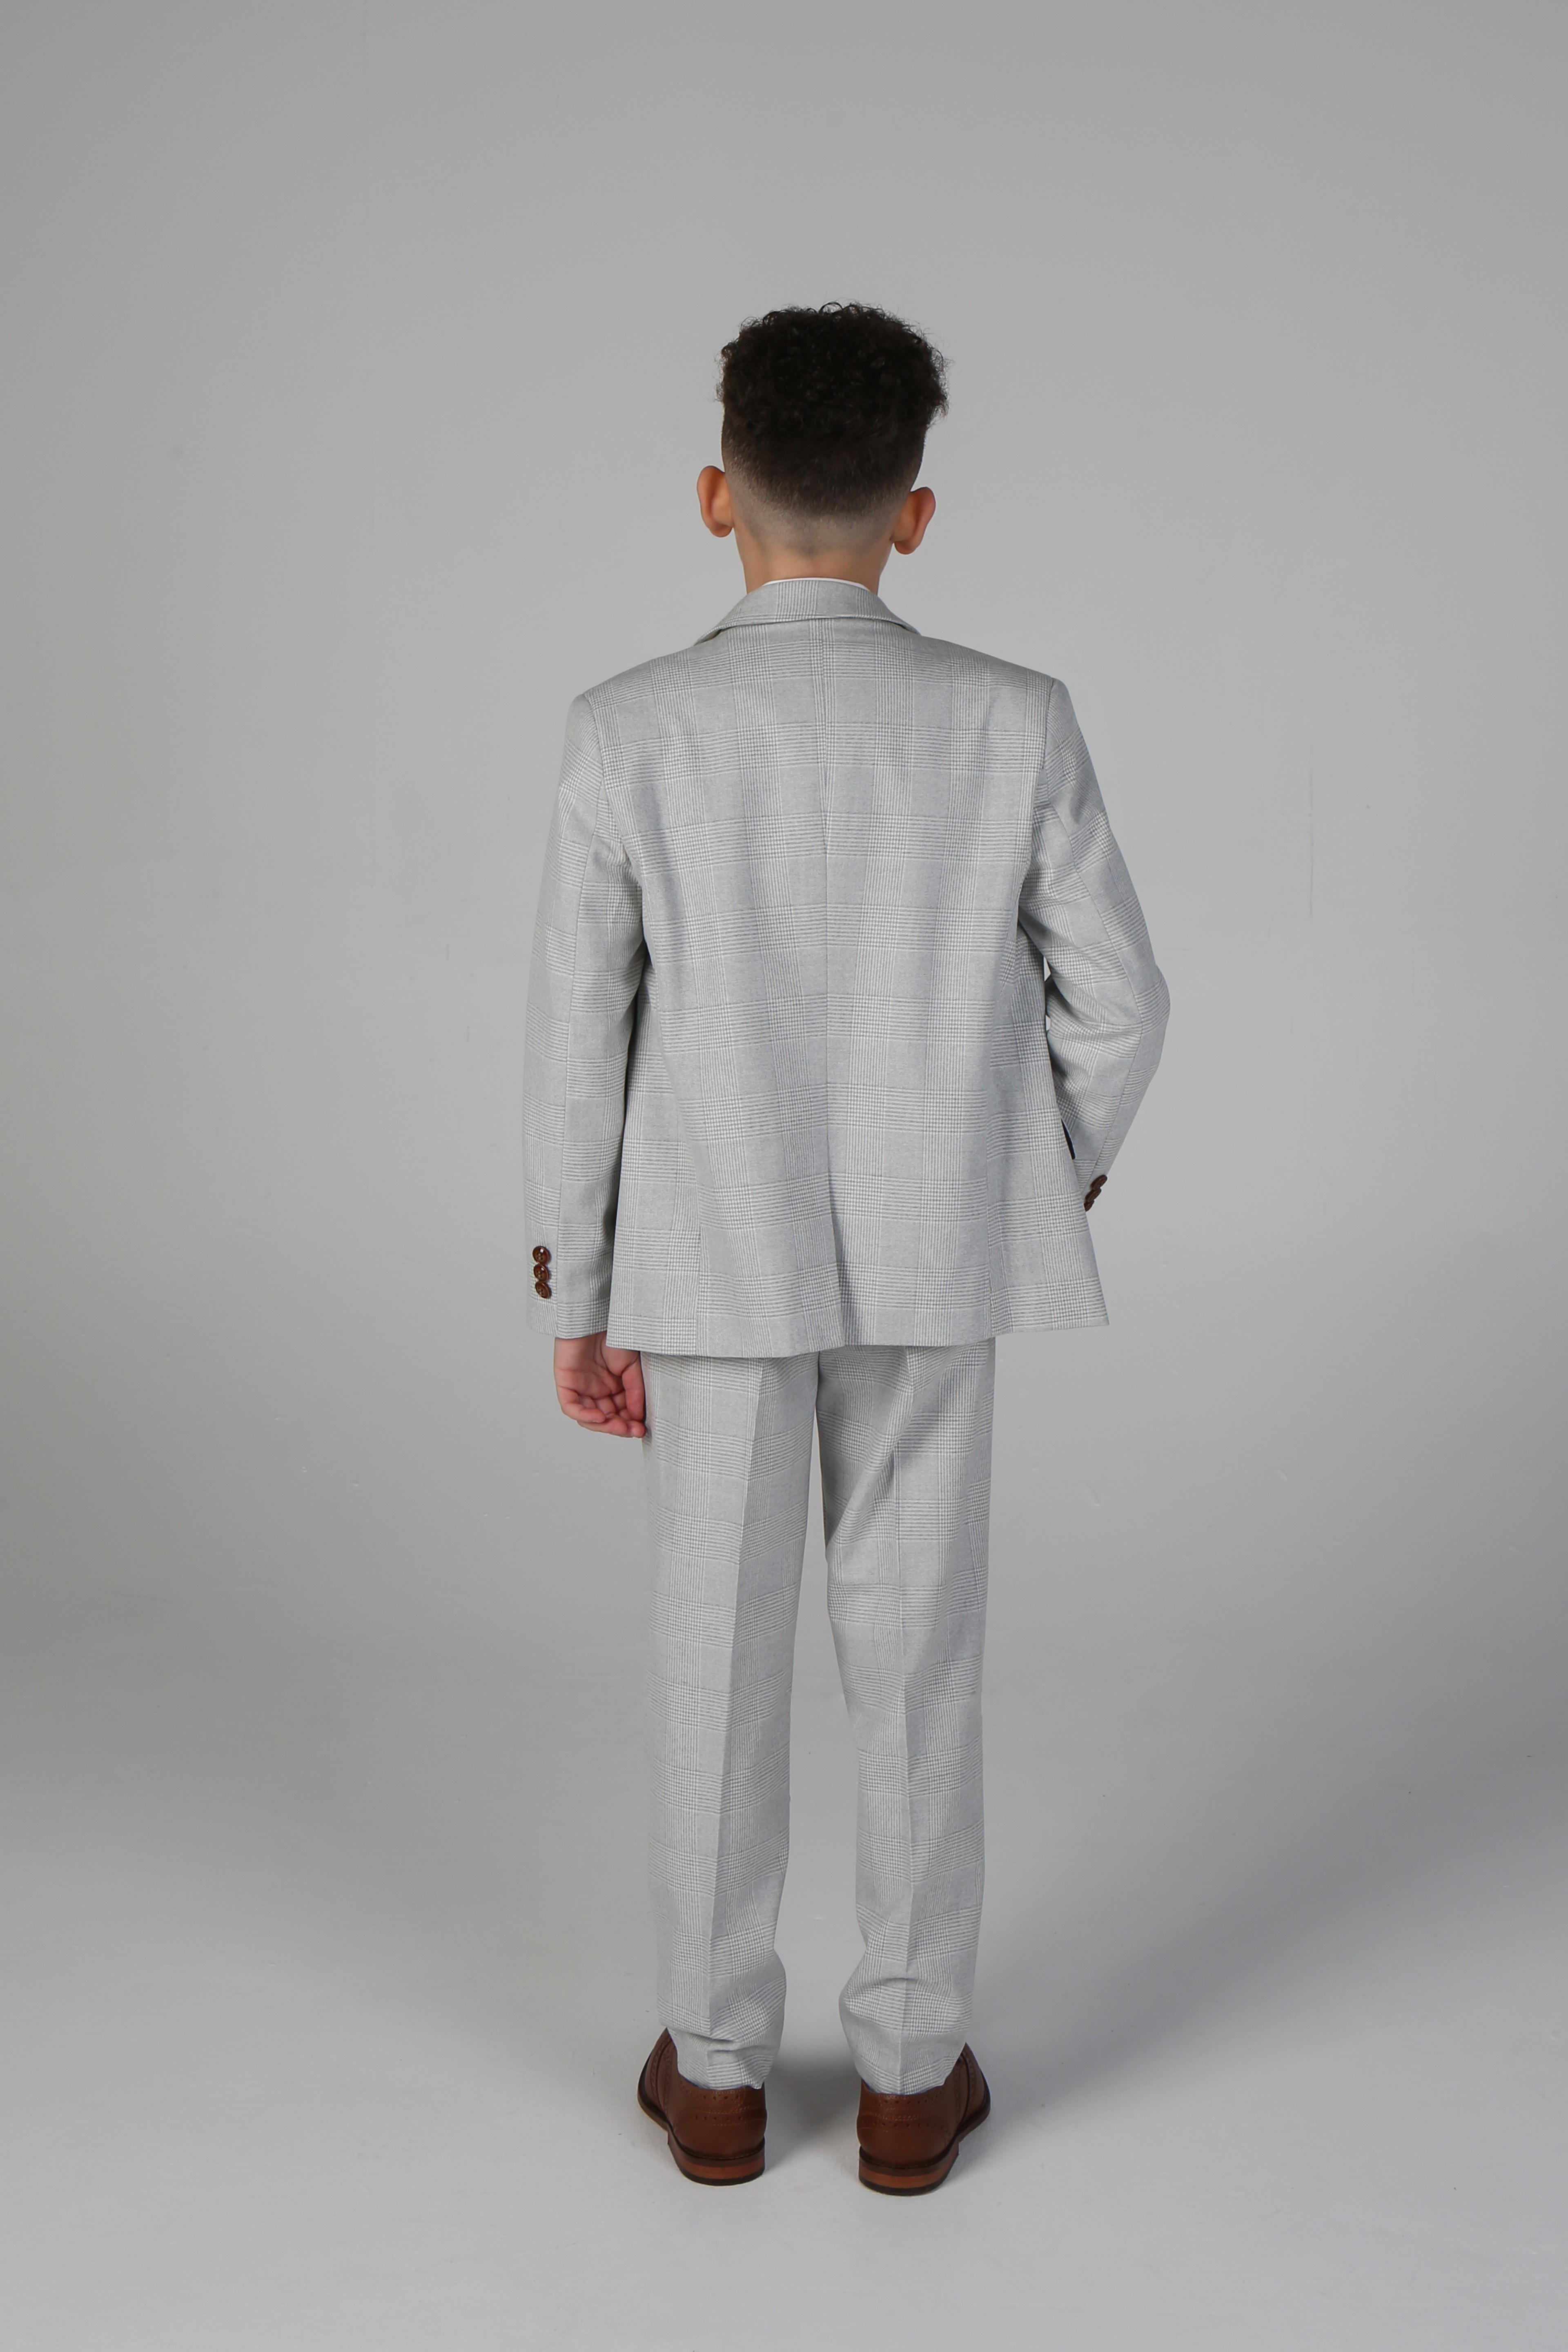 Boys Tailored Fit Tweed Check Suit - MARK Stone